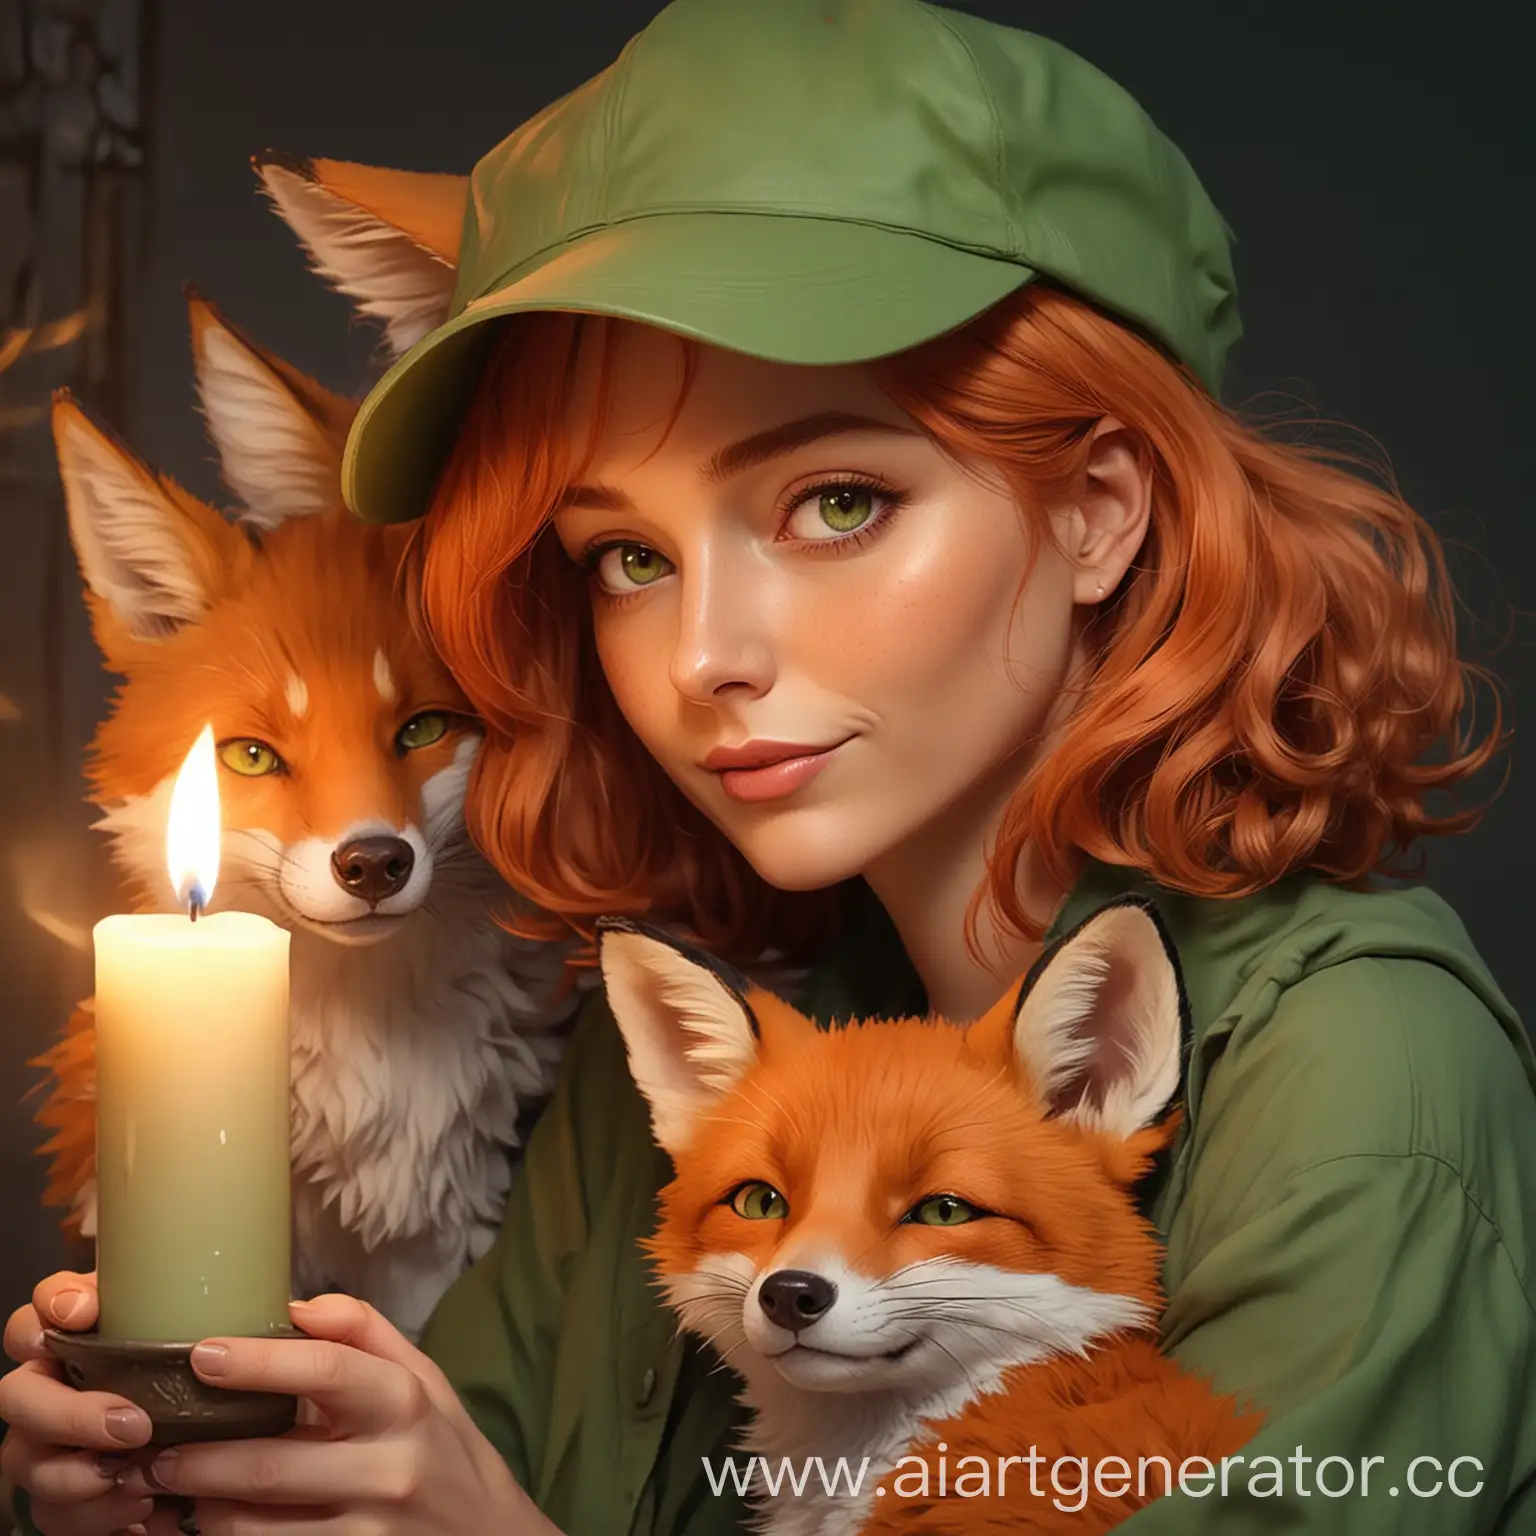 RedHaired-Woman-with-Fox-and-Candle-at-Dawn-Anime-Style-Artwork